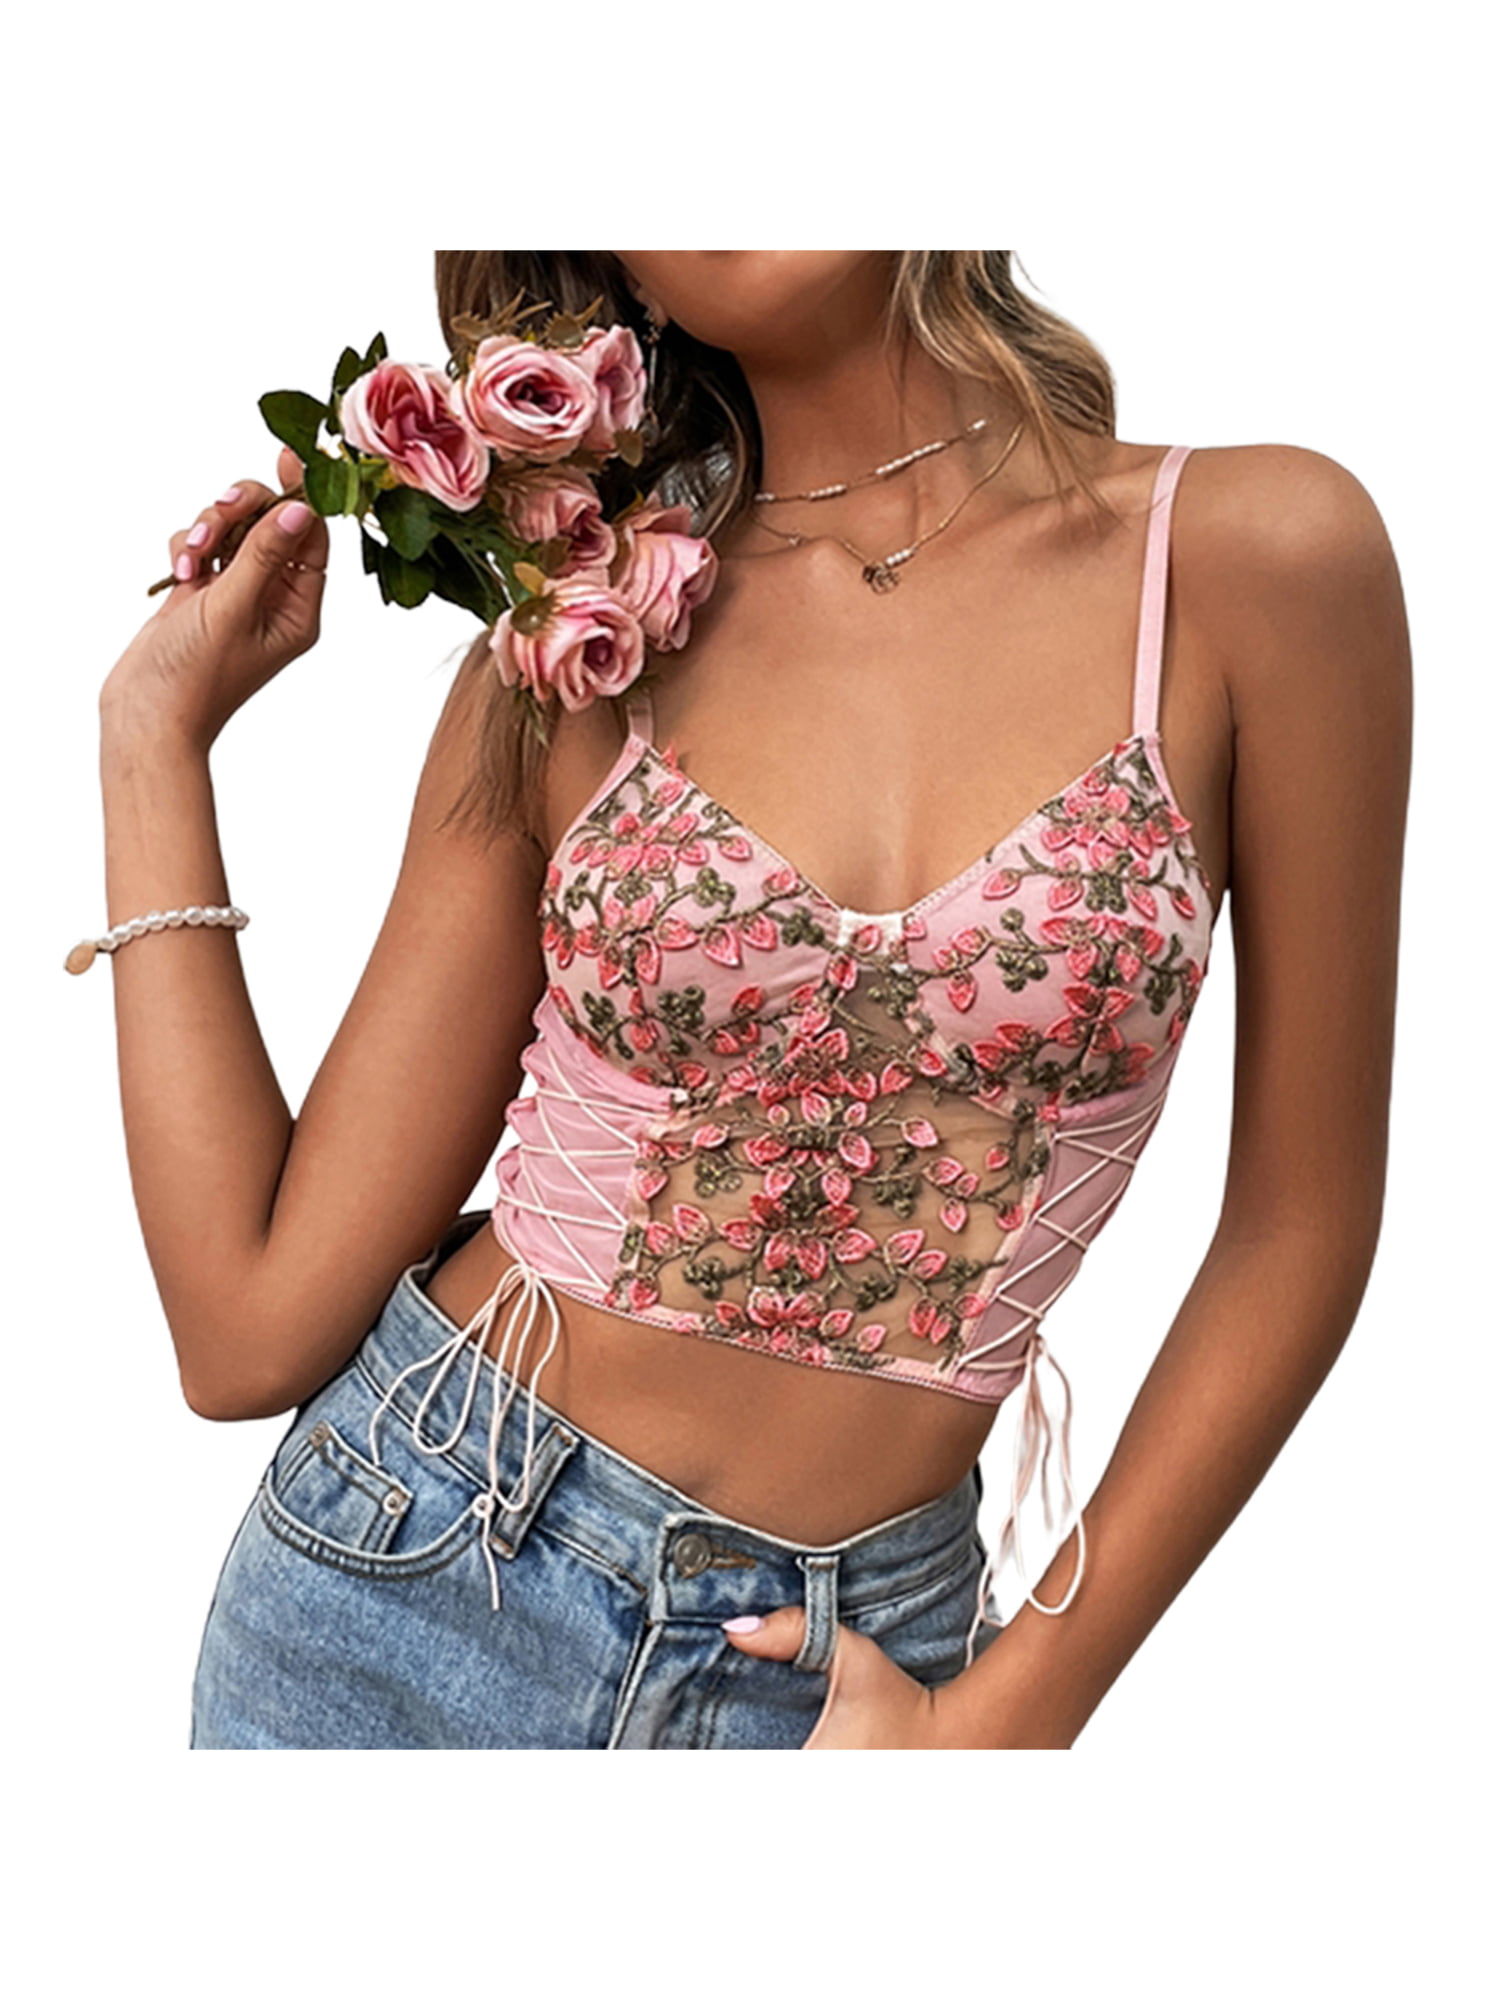 Canrulo Women Lace Corset Crop Top Push Up Bustier Floral Top Cami Top  Aesthetic Spaghetti Strap Top Camisole Bralette Clubwear Pink L 